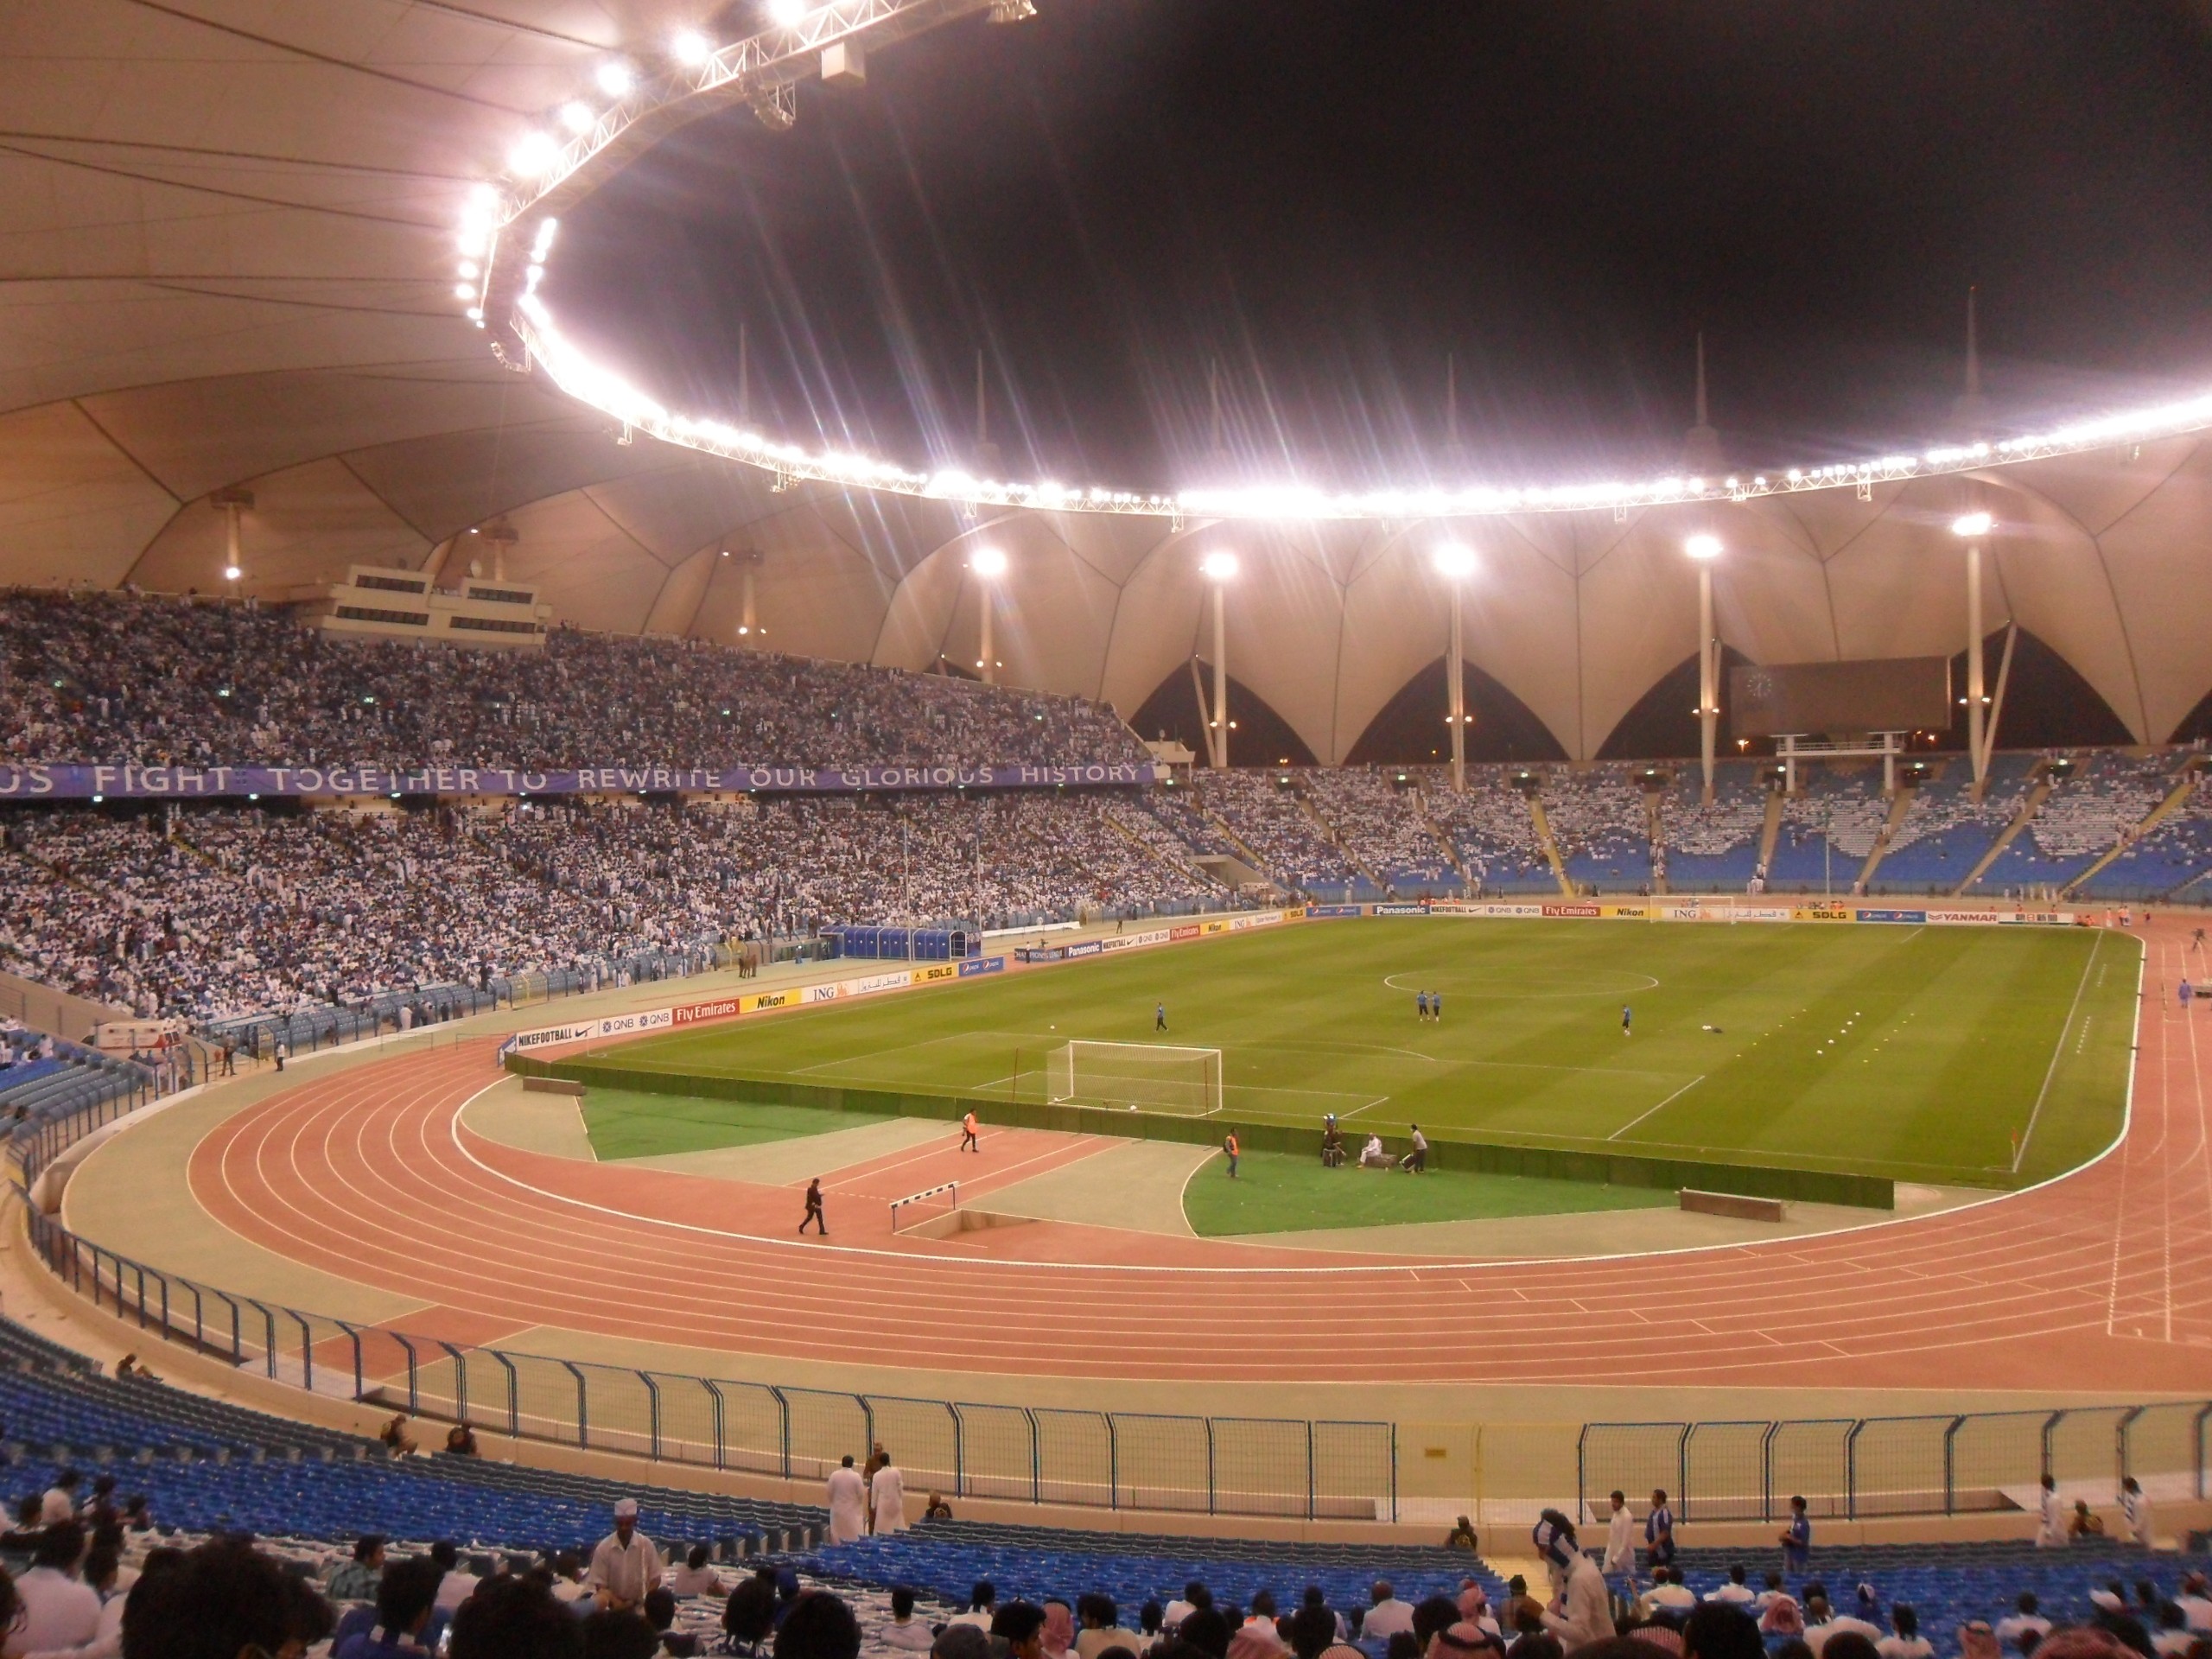 Al-Hilal VS Al Ain ( BETTING TIPS, Match Preview & Expert Analysis )